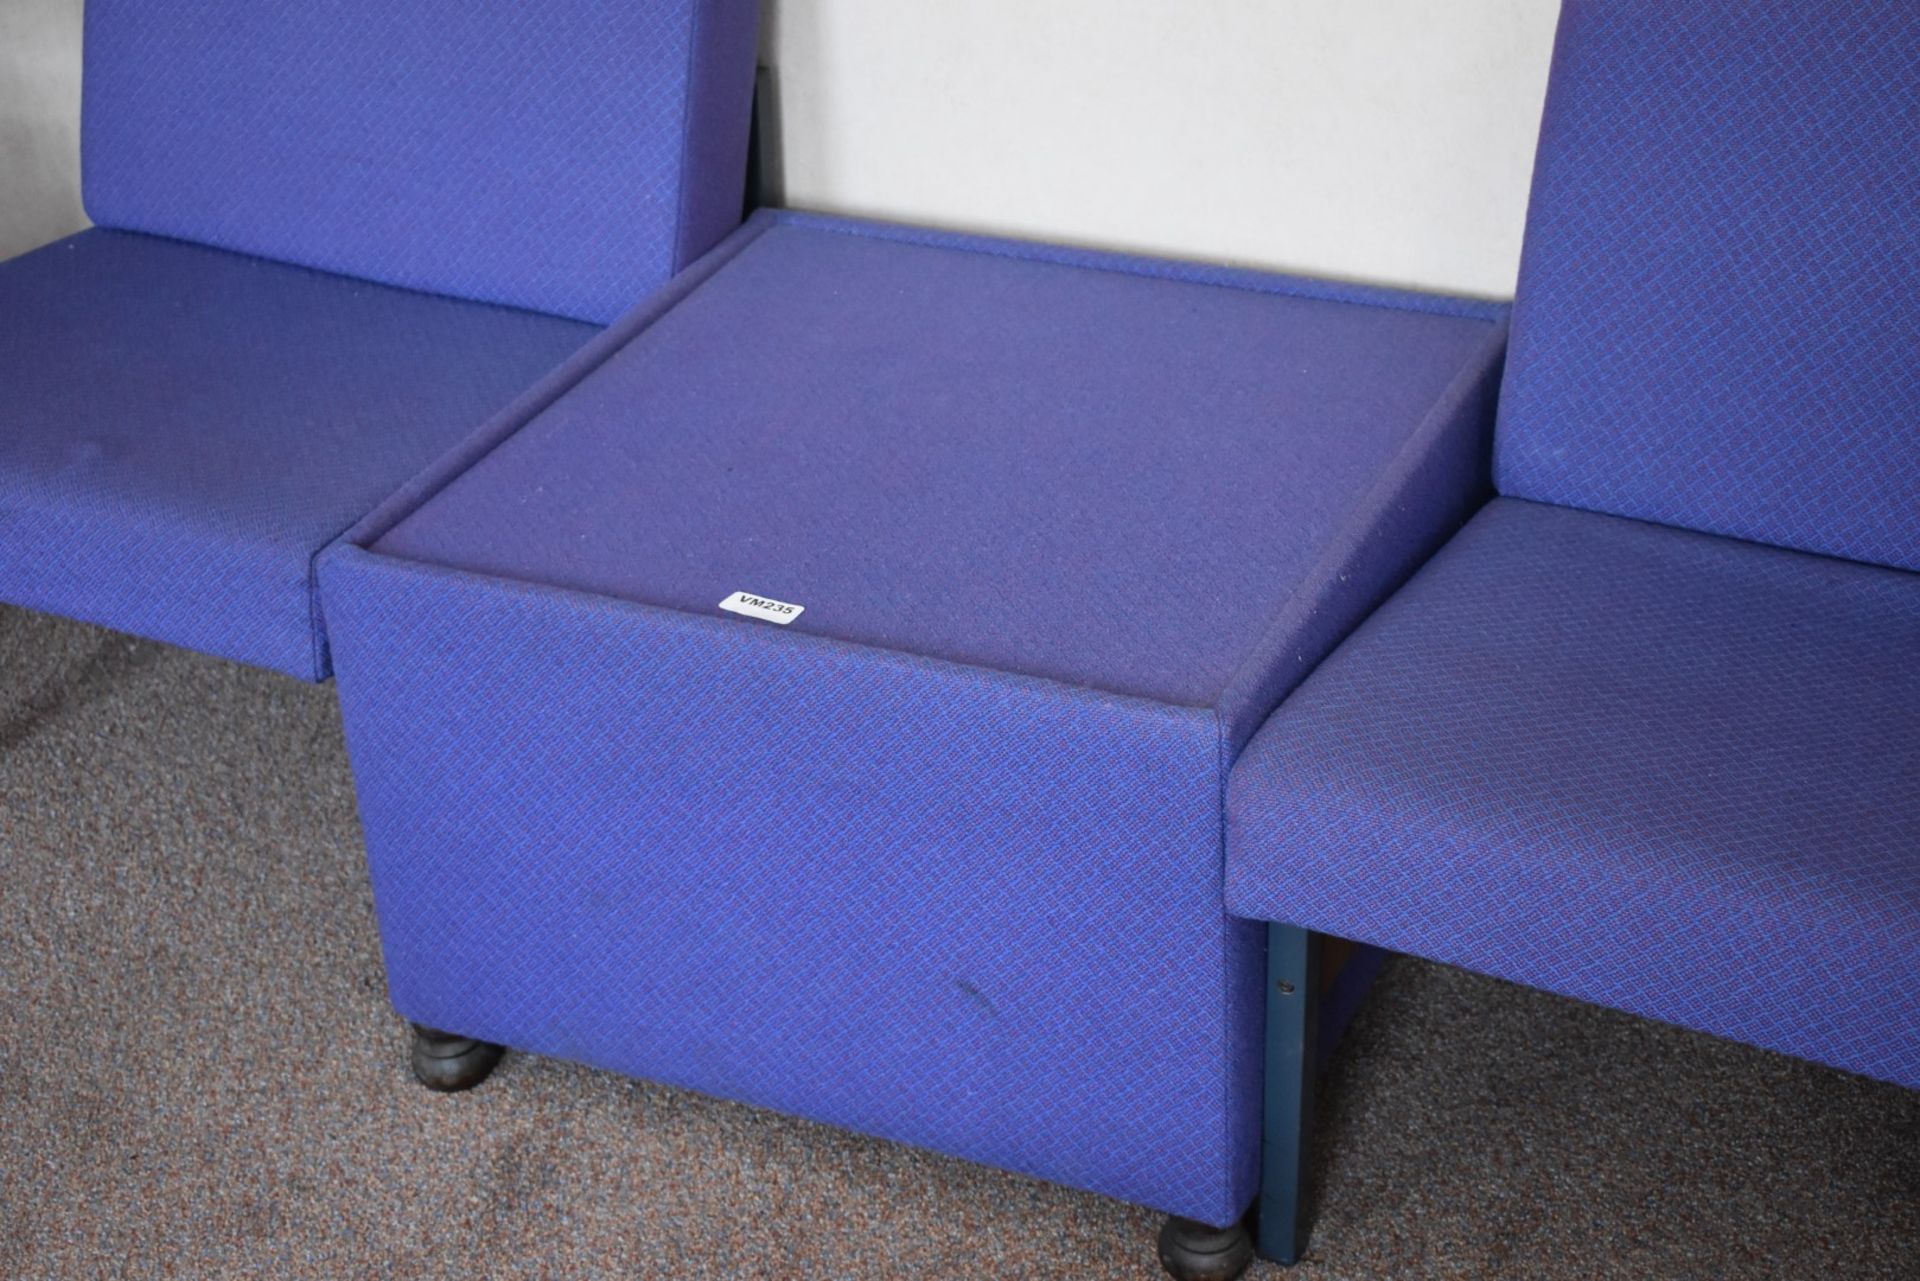 1 x Reception Suite in Blue - Includes Two Chairs and One Table - Overall Width 180cms - Ref VM235 - Image 2 of 3